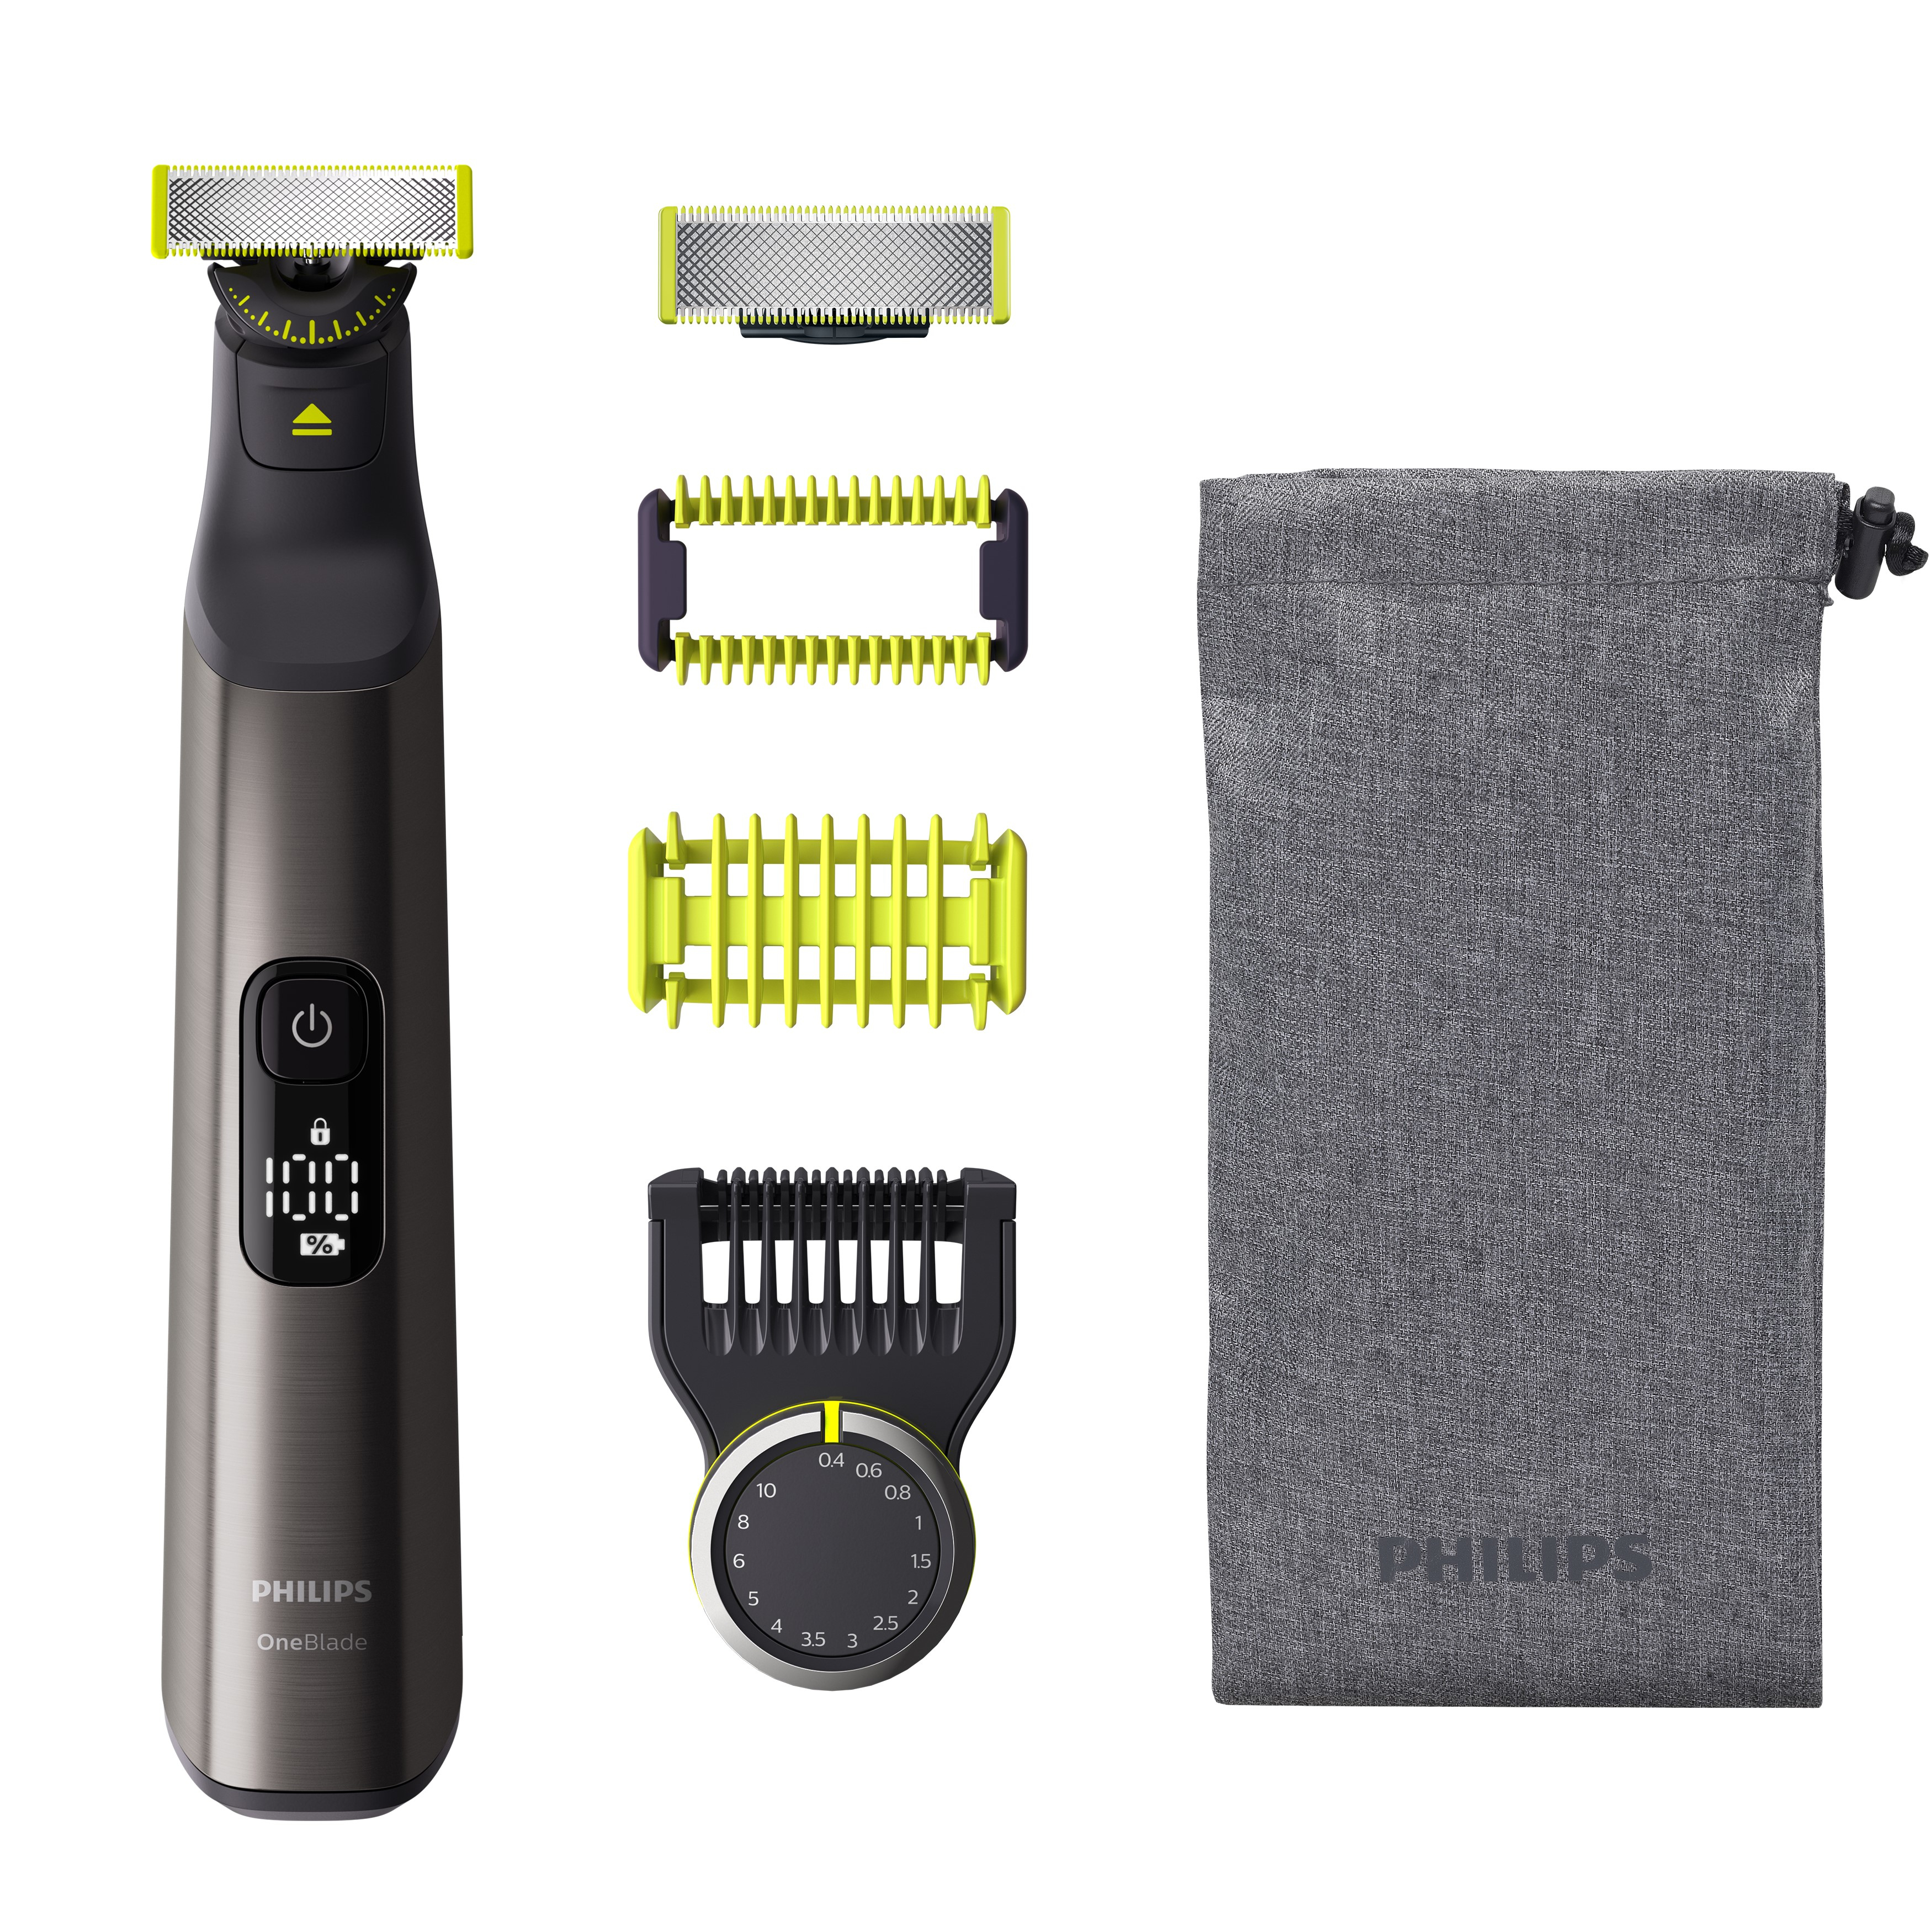 Philips One Blade Pro QP6551/15